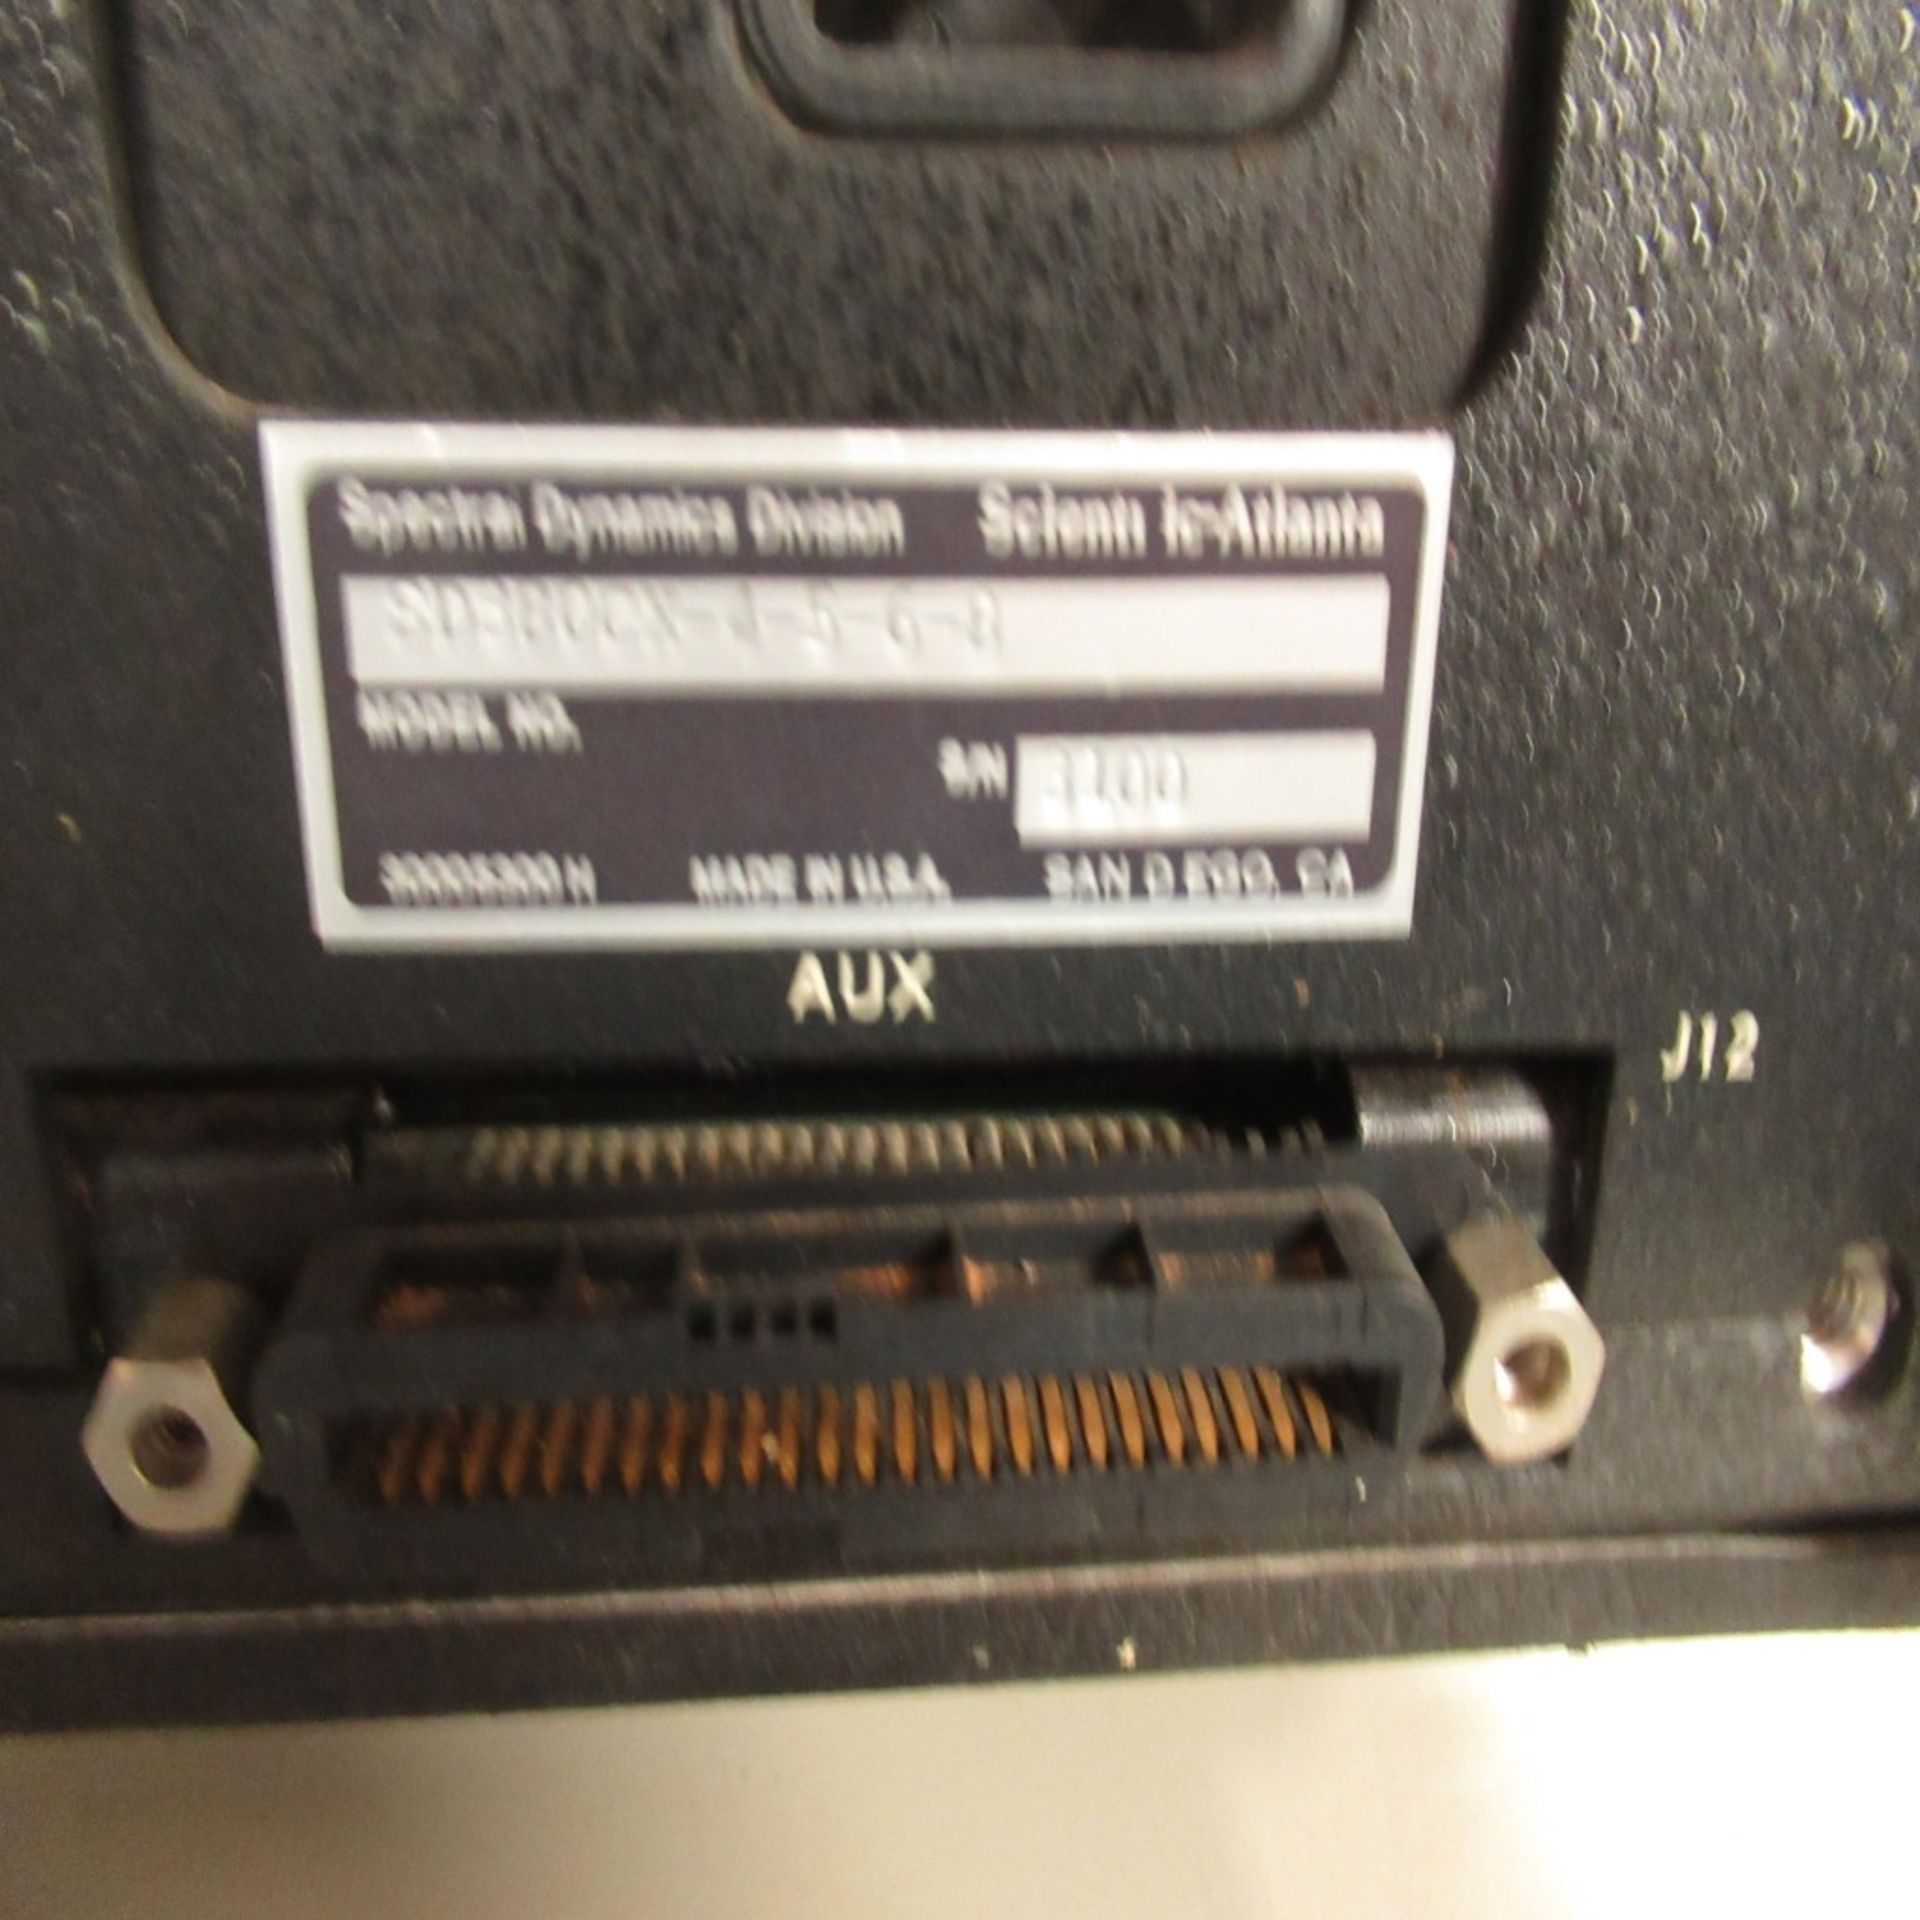 PHOTON SNAP SHOT MODEL 6000 *POWERS ON* NO SCREEN DISPLAY; FARNELL AP20-80 REGULATED POWER SUPPLY * - Image 66 of 222